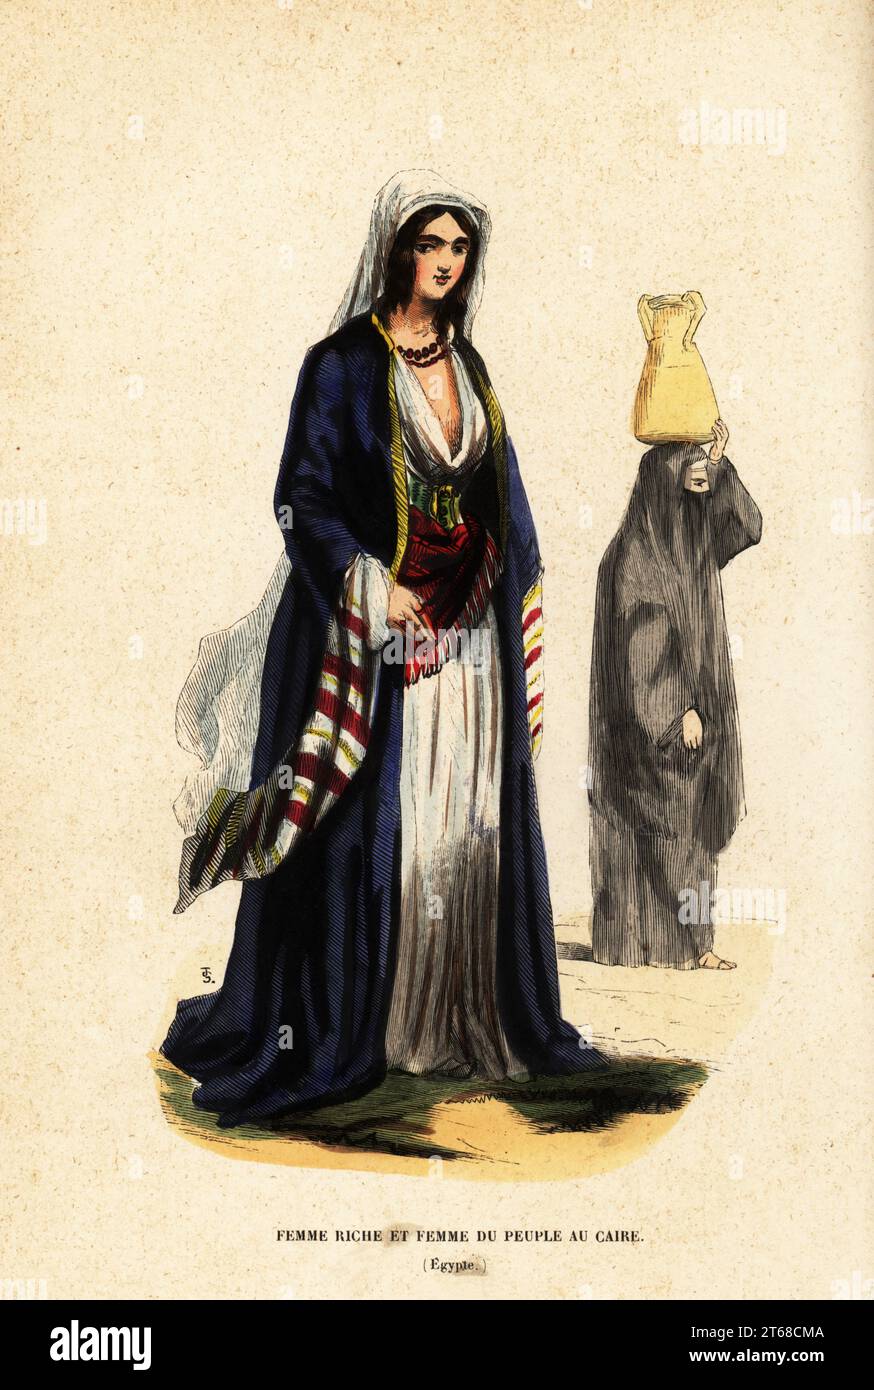 Rich woman and woman of the people, Cairo, Egypt, 19th century. The rich woman has her eyes decorated with khol, wears a wool cap, white chemise, long gold-trimmed yalek (robe) and cashmere or muslin scarf as a belt. The common woman wears a burka and carries an urn on her head. Femme riche et femme du peuple au Caire, Egypte. Handcoloured woodcut by T.S. from Auguste Wahlen's Moeurs, Usages et Costumes de tous les Peuples du Monde, (Manners, Customs and Costumes of all the People of the World) Librairie Historique-Artistique, Brussels, 1845. Wahlen was the pseudonym of Jean-Francois-Nicolas L Stock Photo